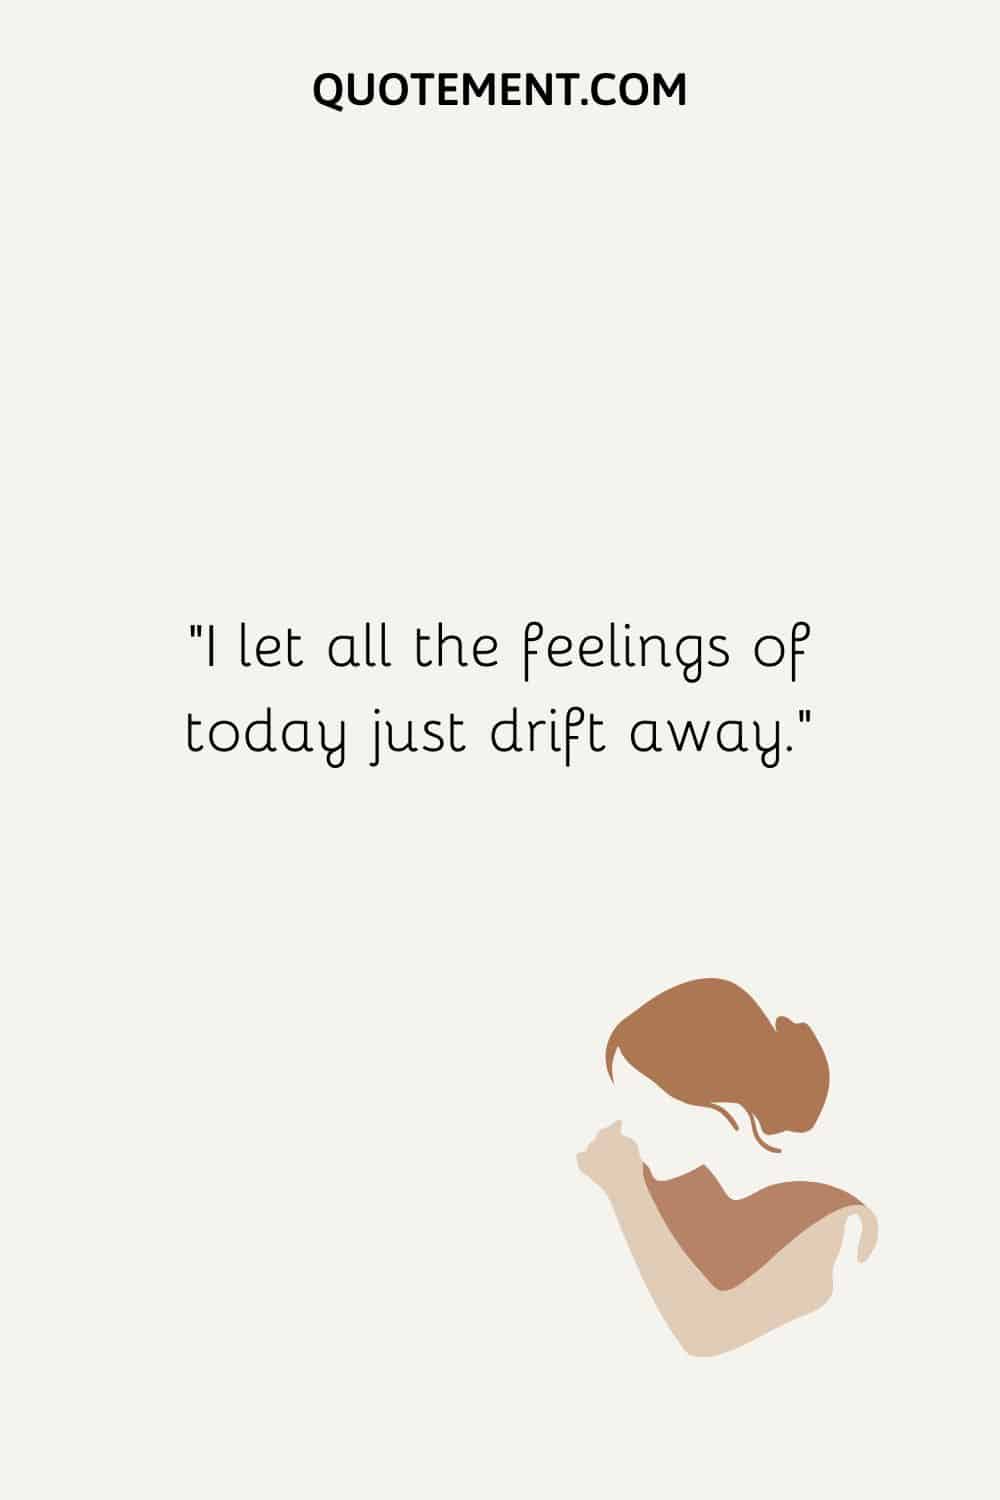 I let all the feelings of today just drift away